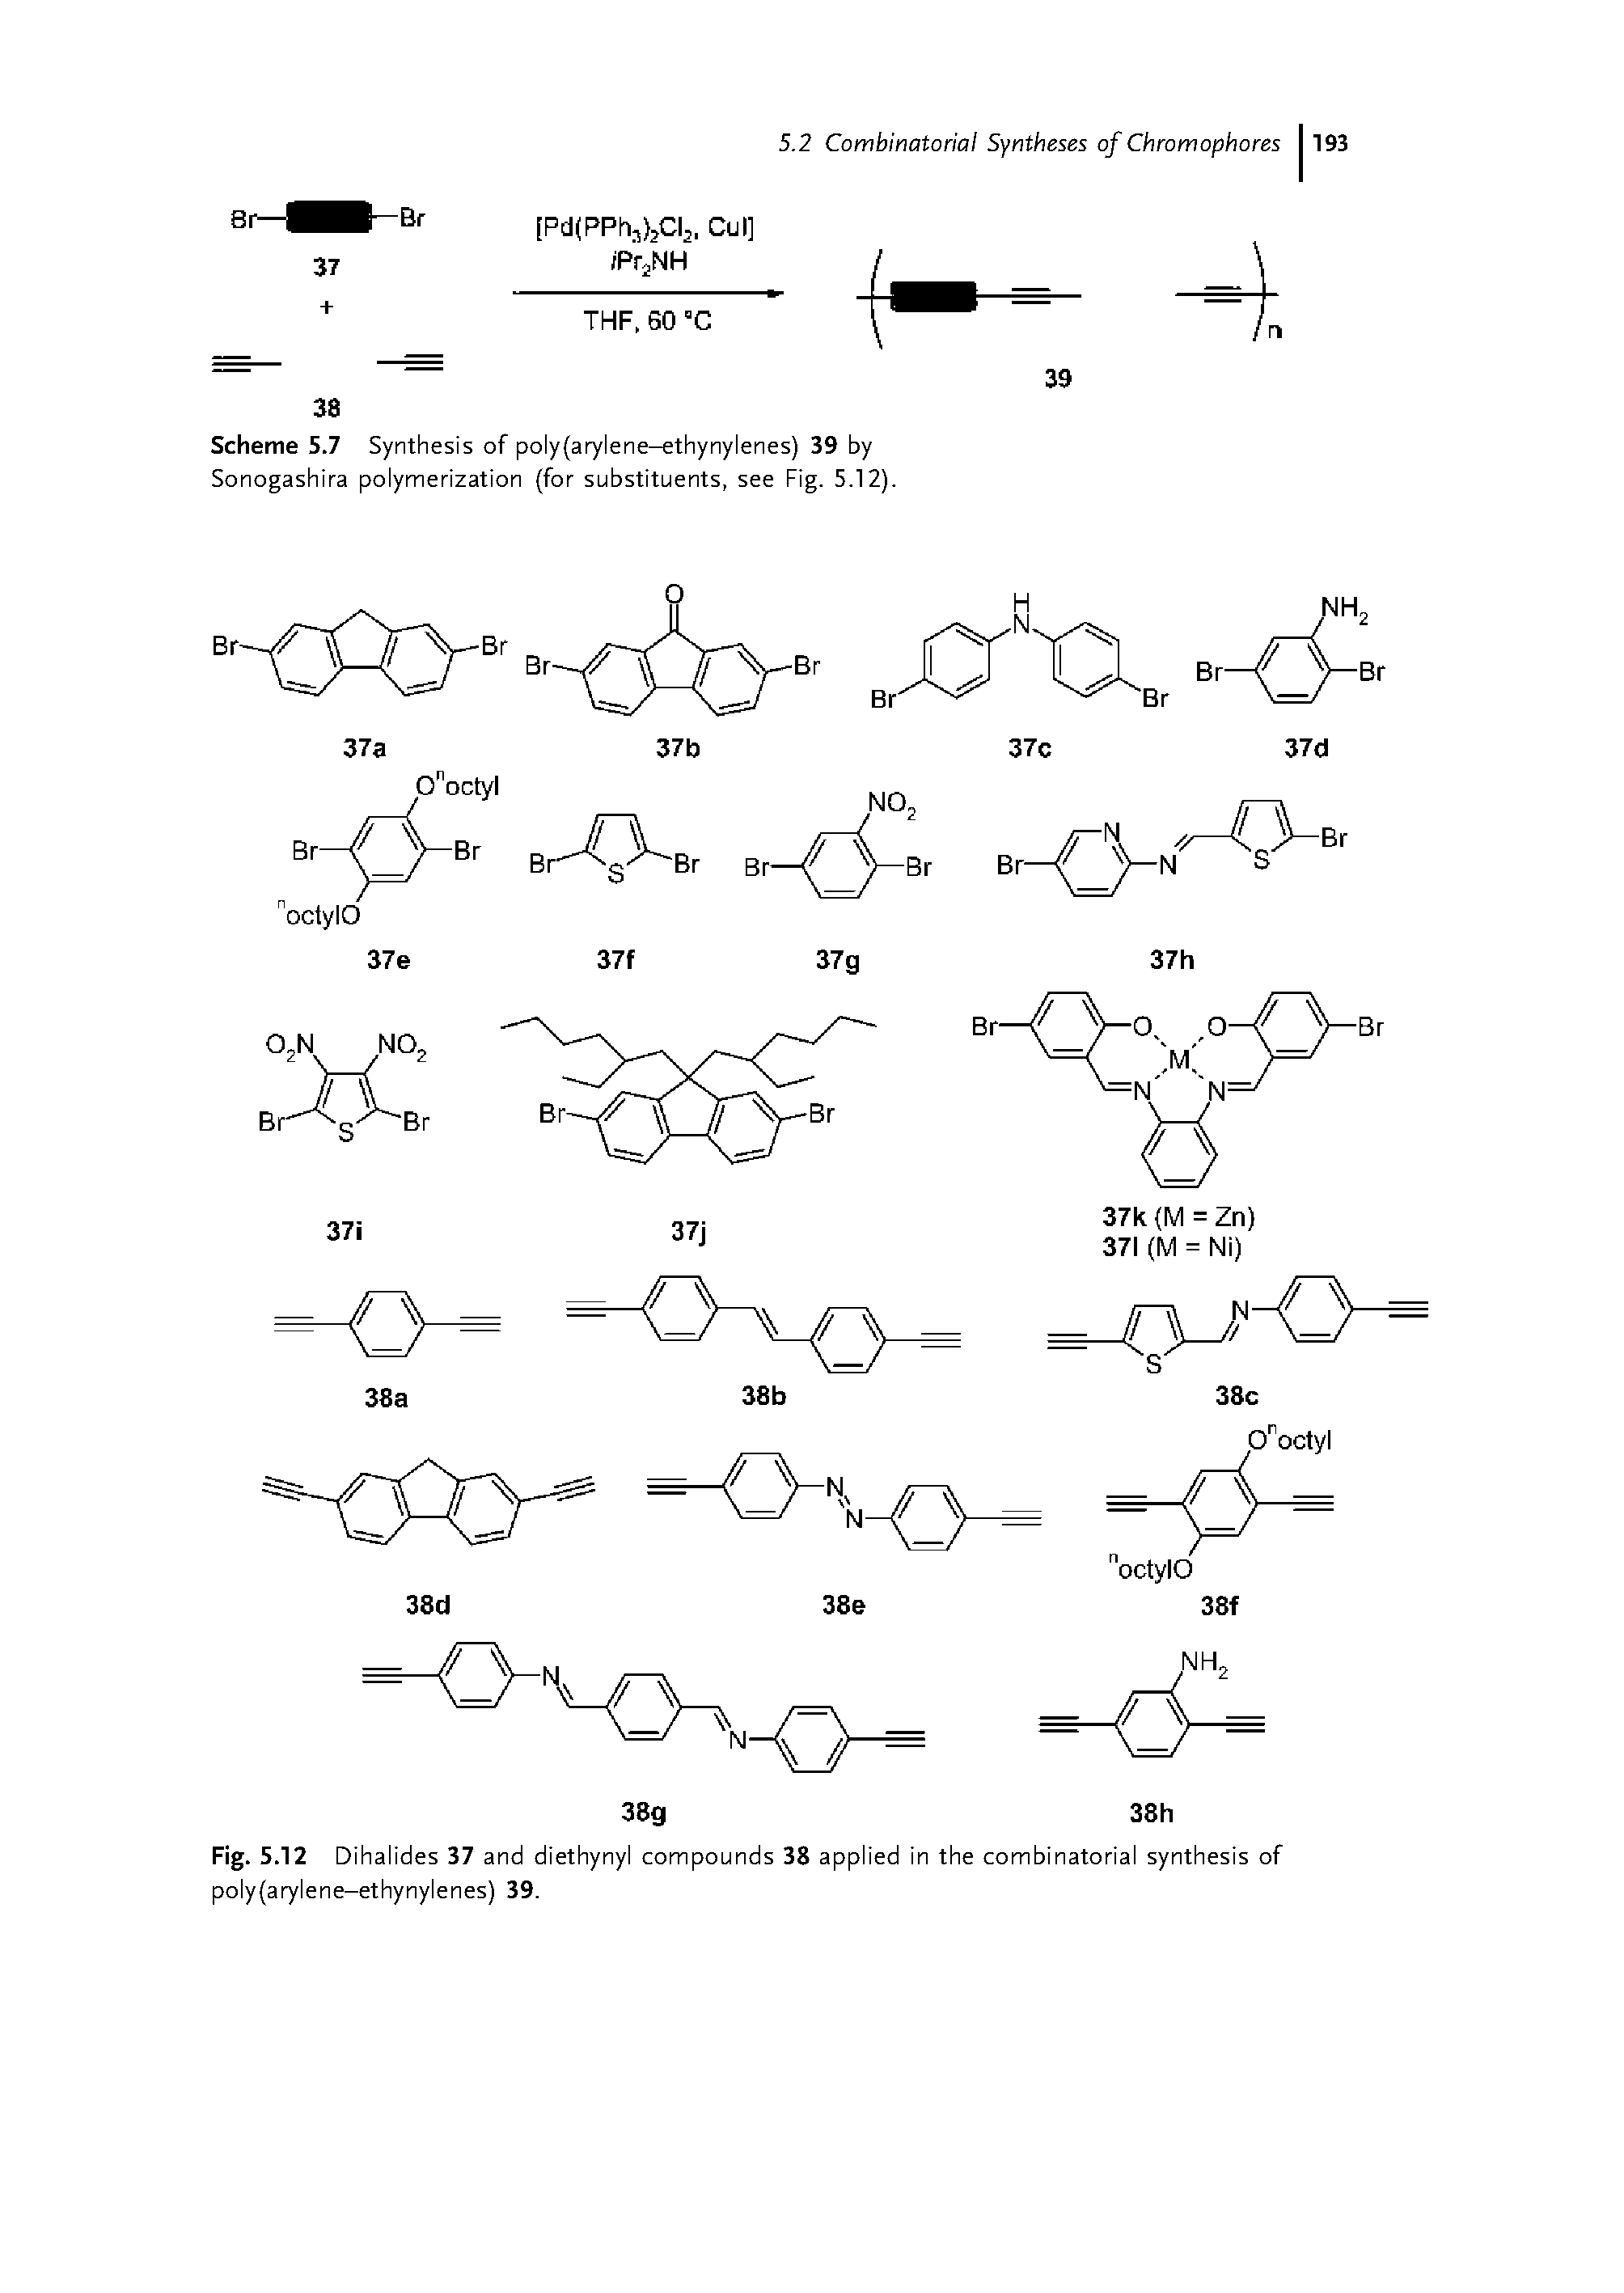 Fig. 5.12 D ihalides 37 and diethynyl compounds 38 applied in the combinatorial synthesis of poly(arylene-ethynylenes) 39.